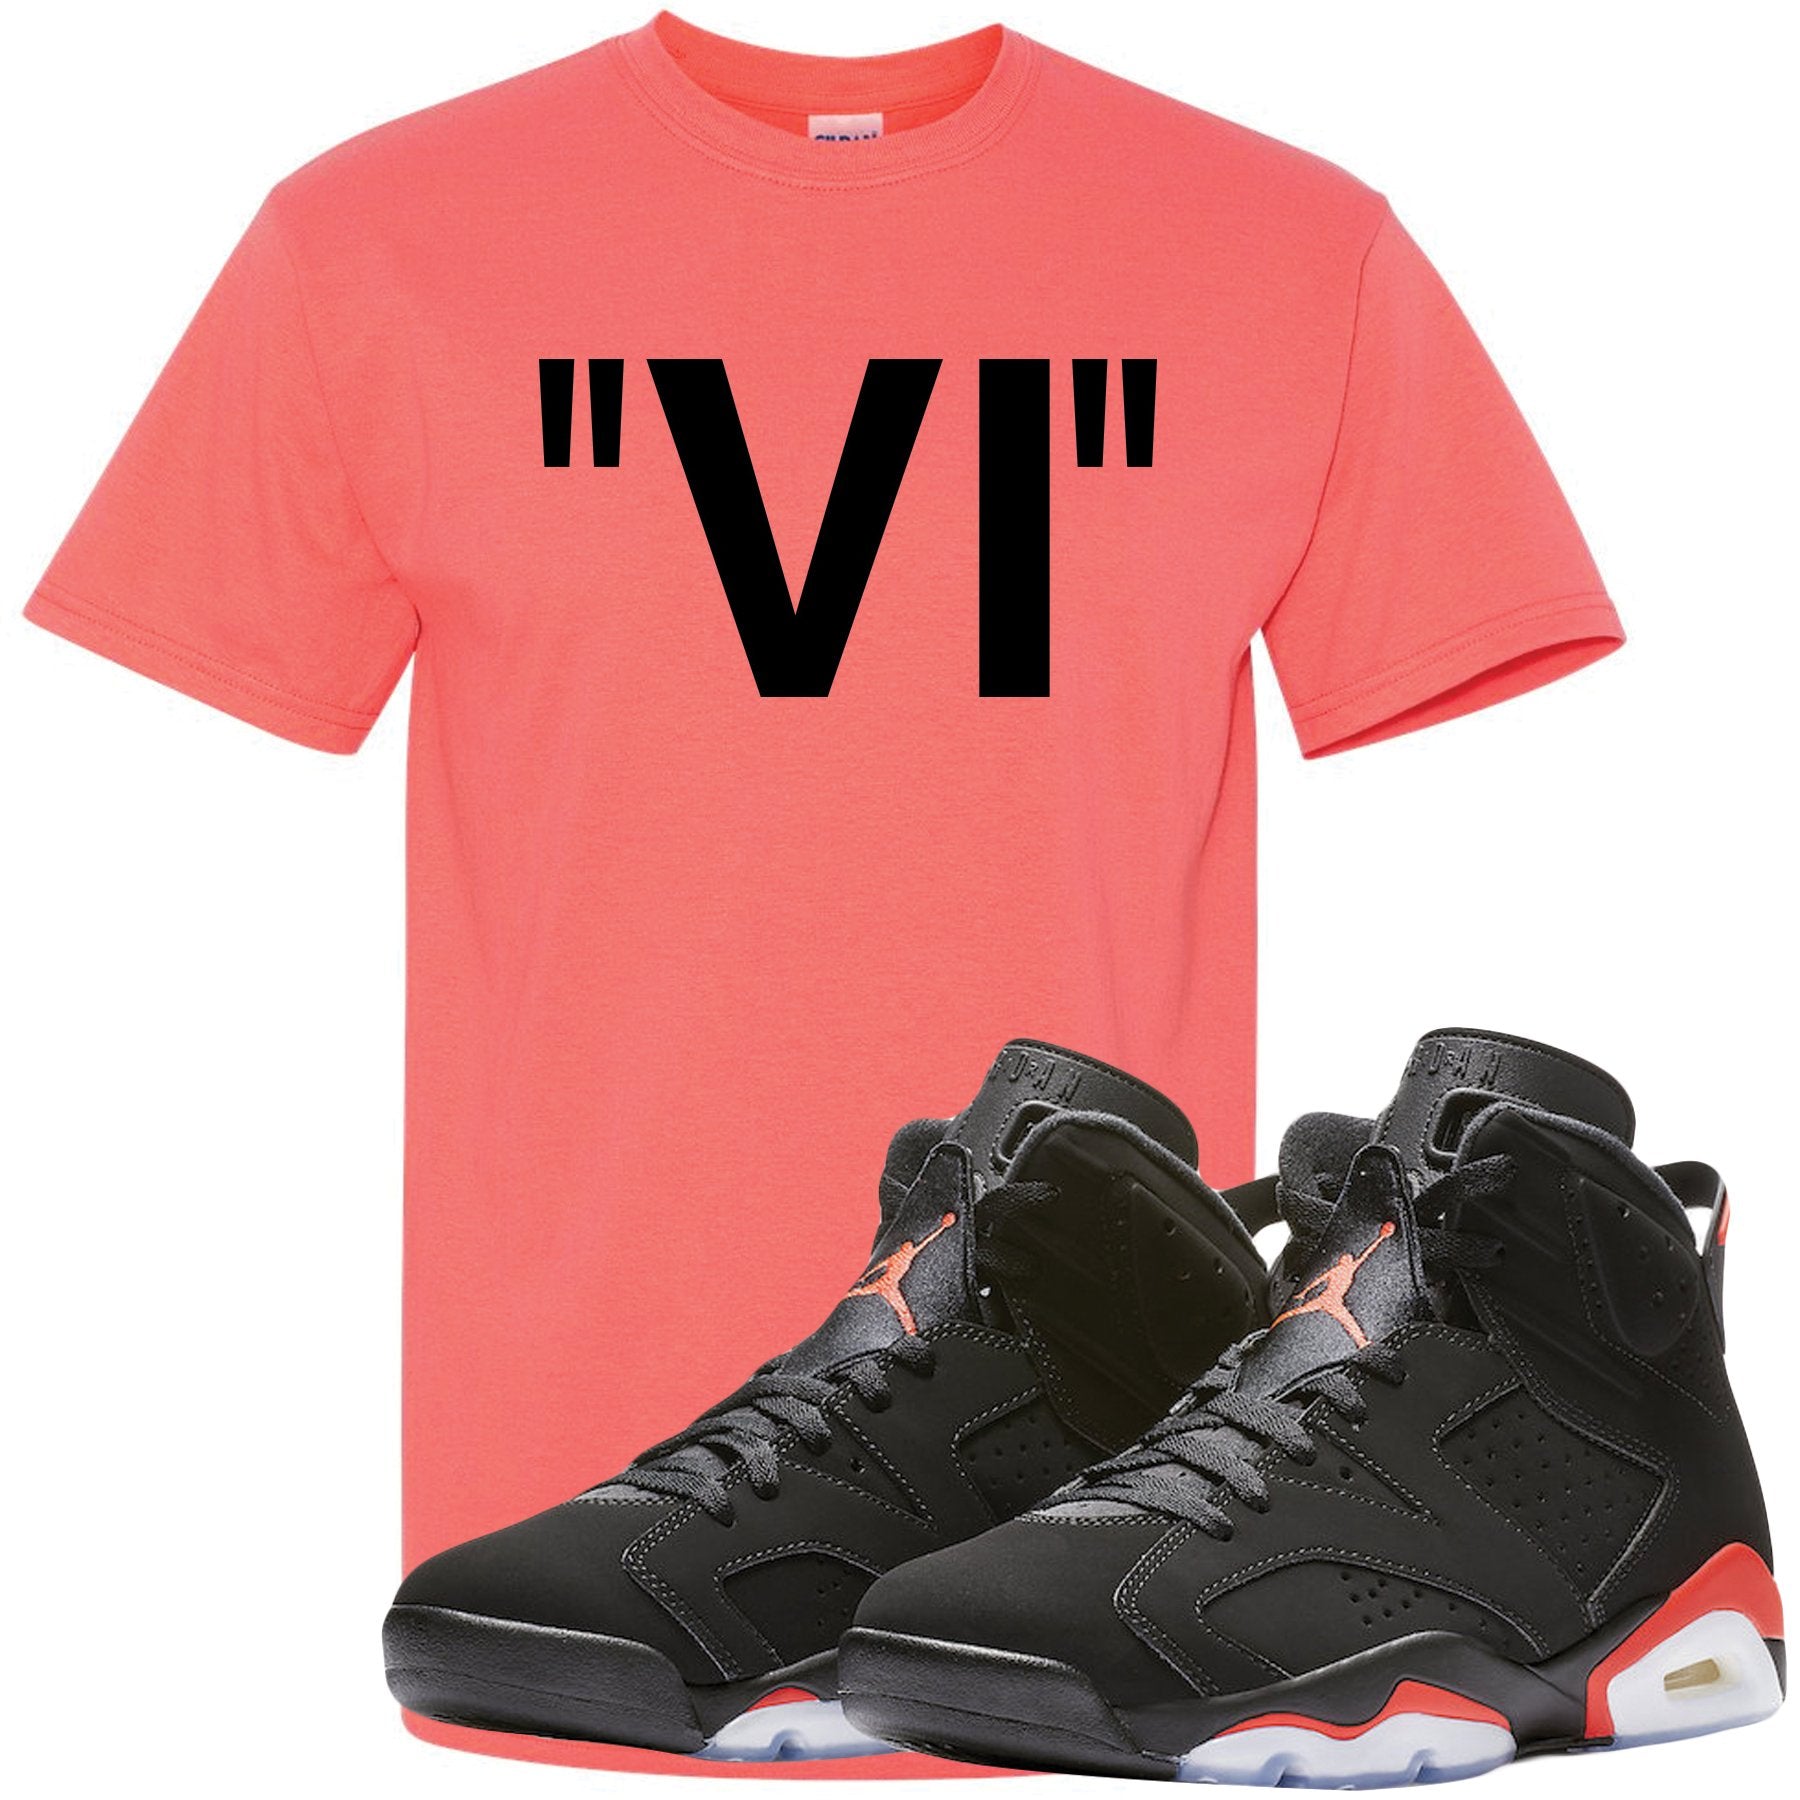 The Jordan 6 Infrared Sneaker Matching Tee is custom designed to perfectly match the retro Jordan 6 Infrared sneakers from Nike.